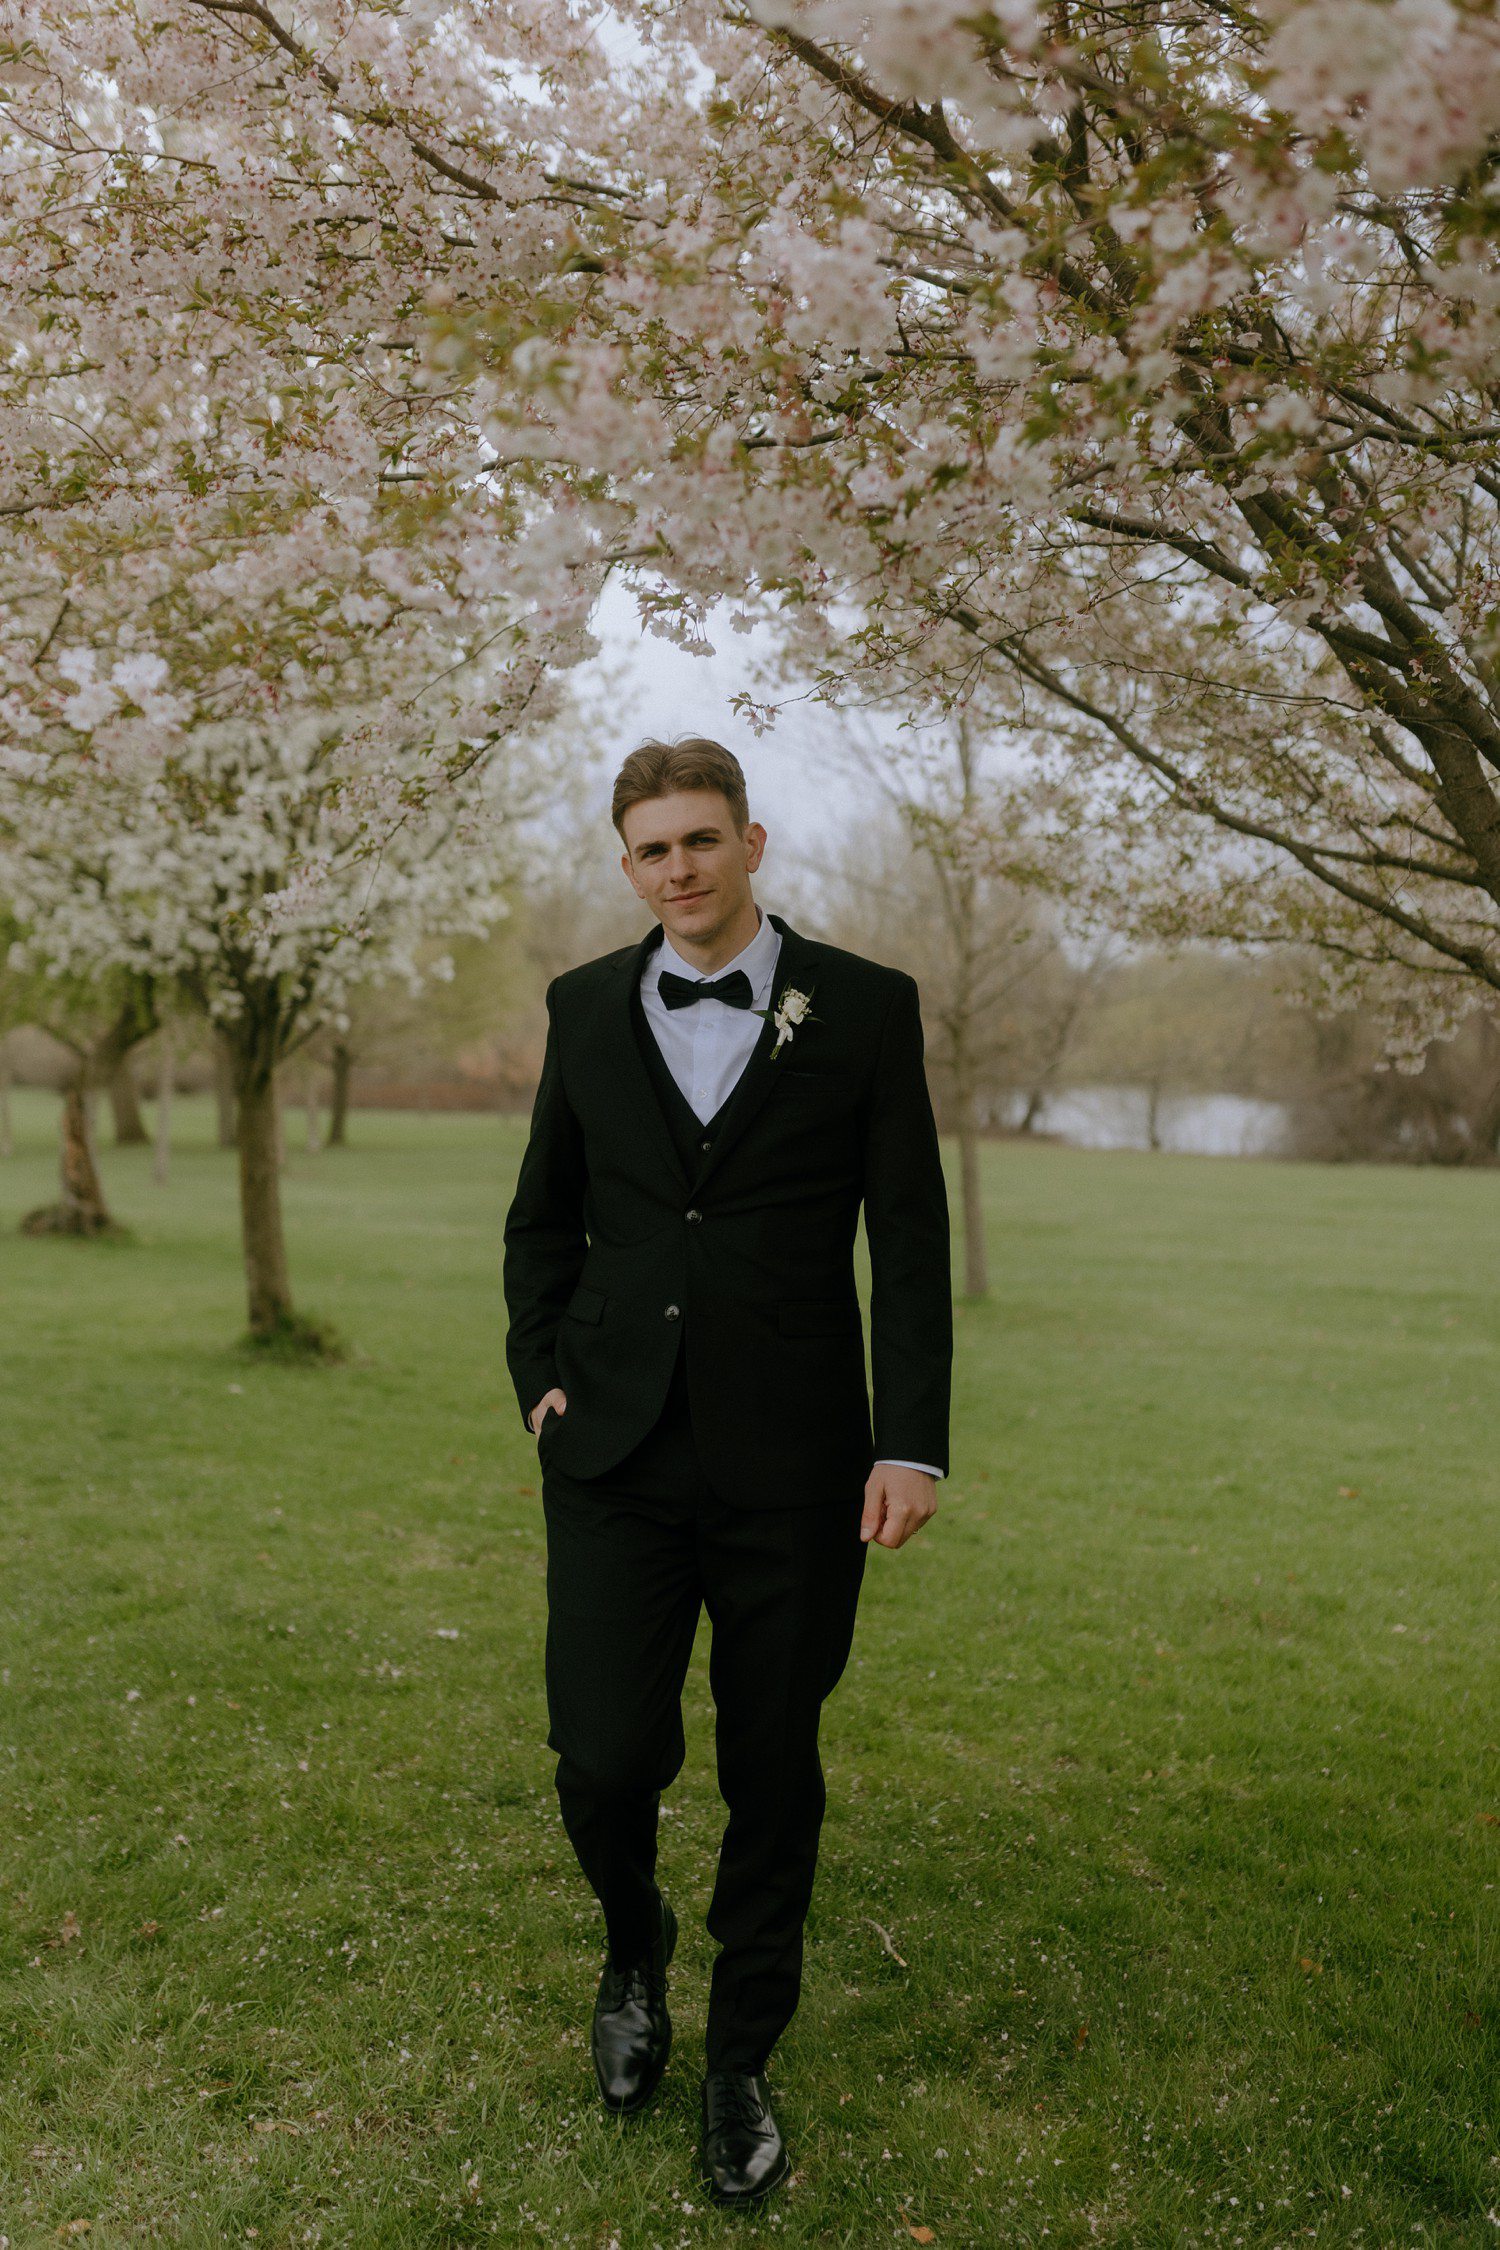 Groom wedding style in black suit with bow tie. 